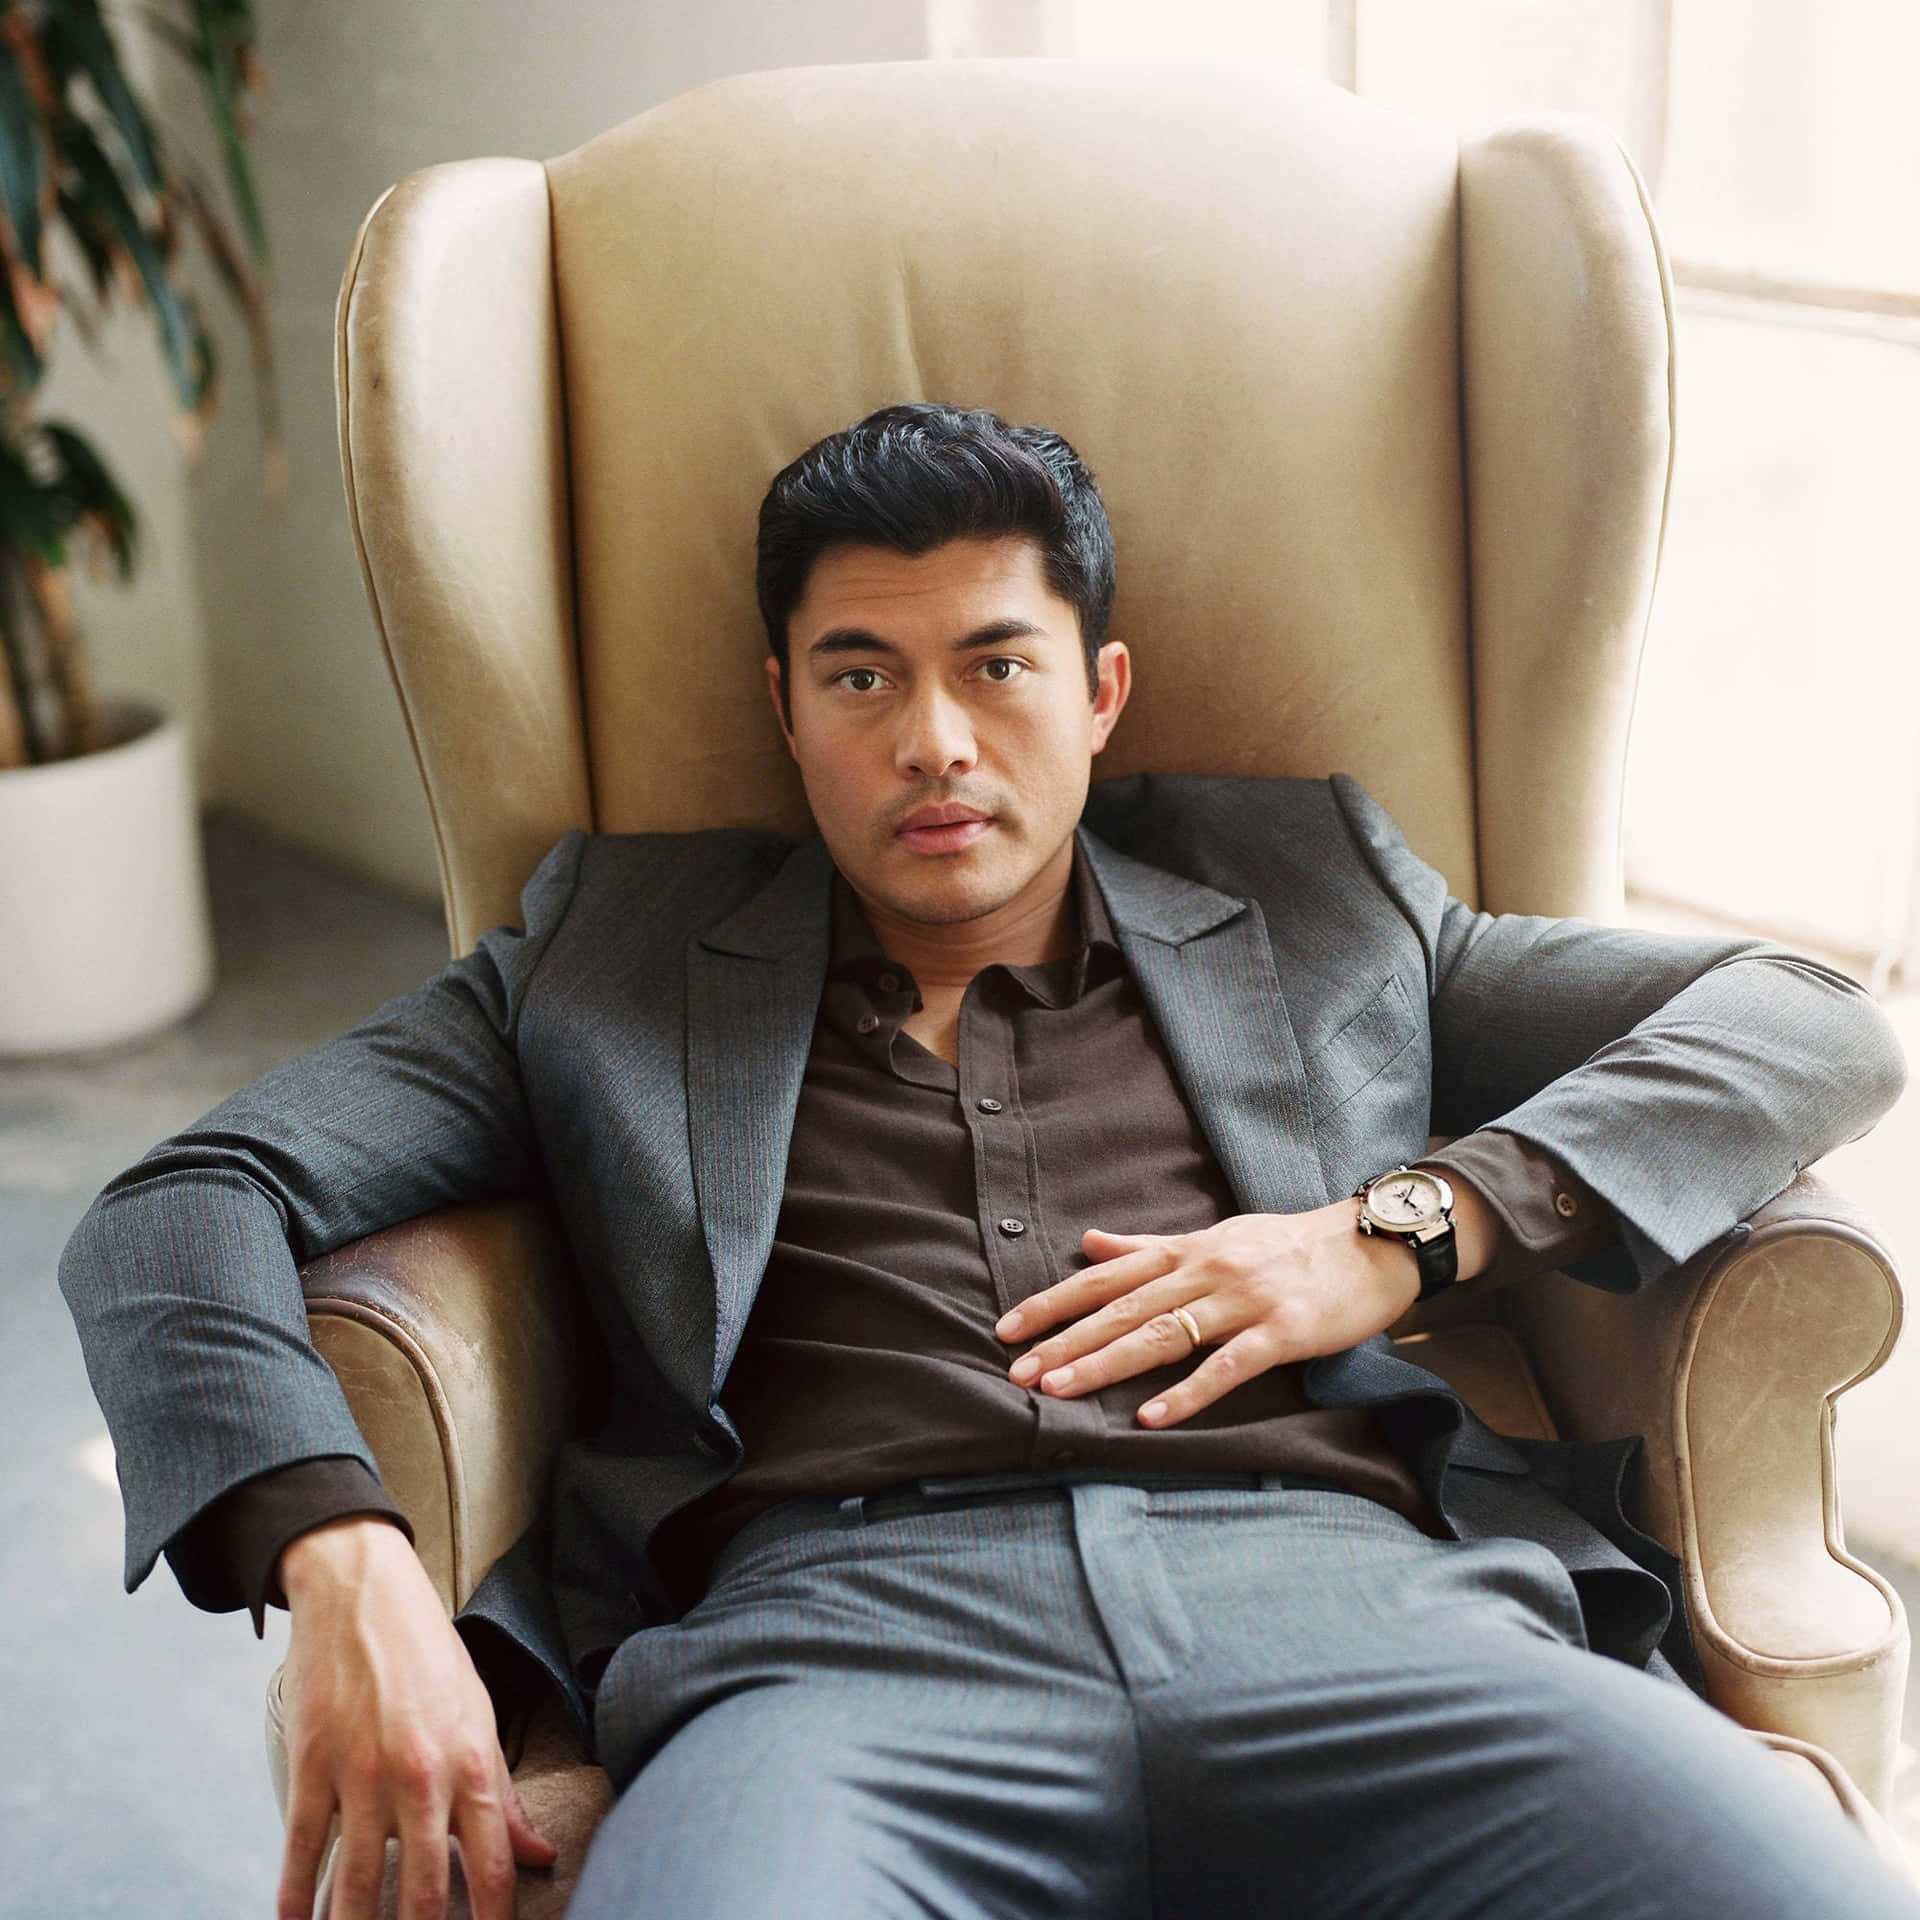 Asian Actor On The Chair Wallpaper